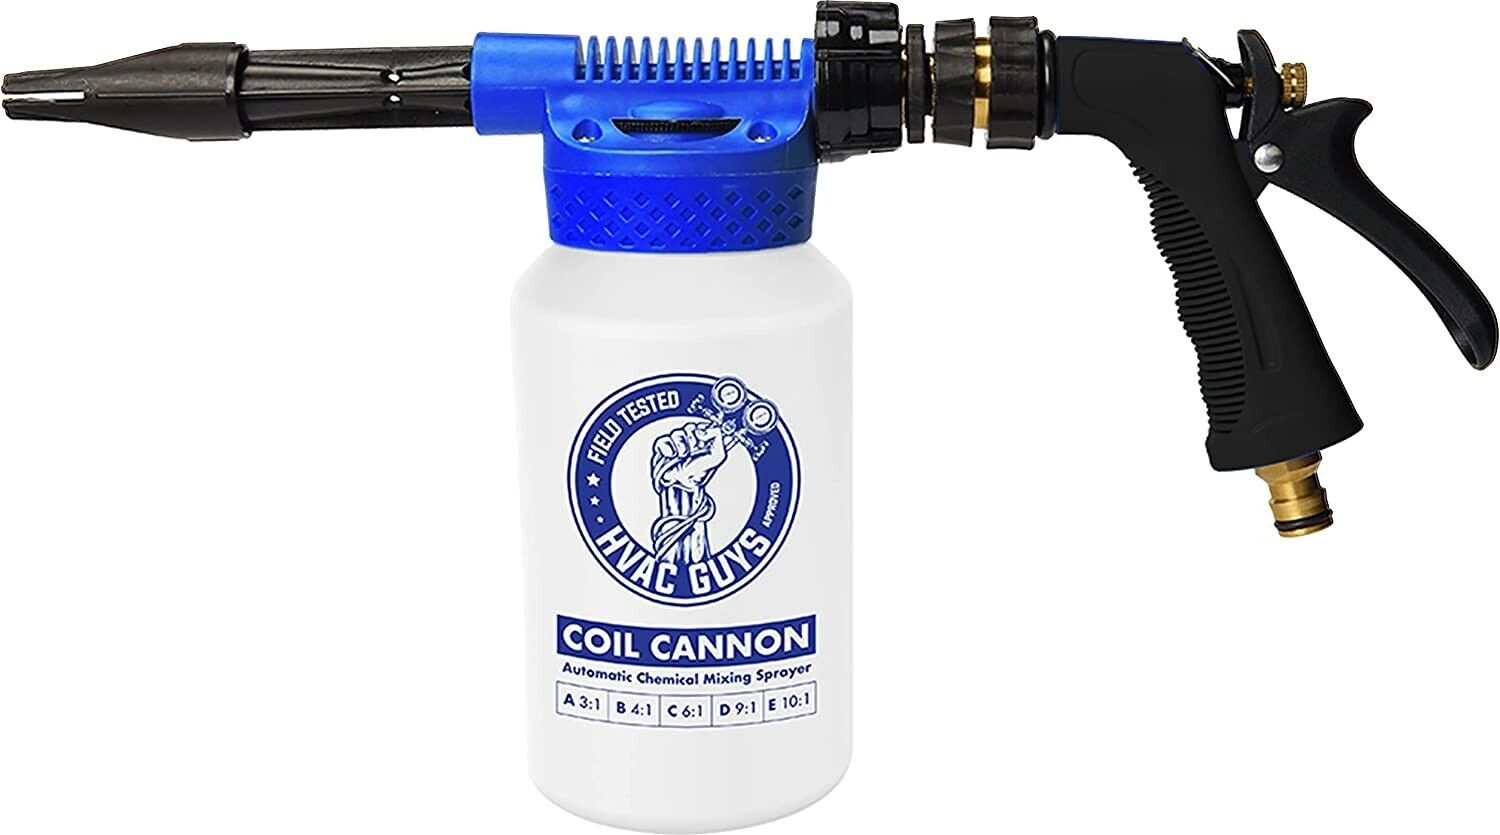 HVAC Guys Coil Cannon - Coil Cleaner Chemical Mixing Sprayer for HVAC